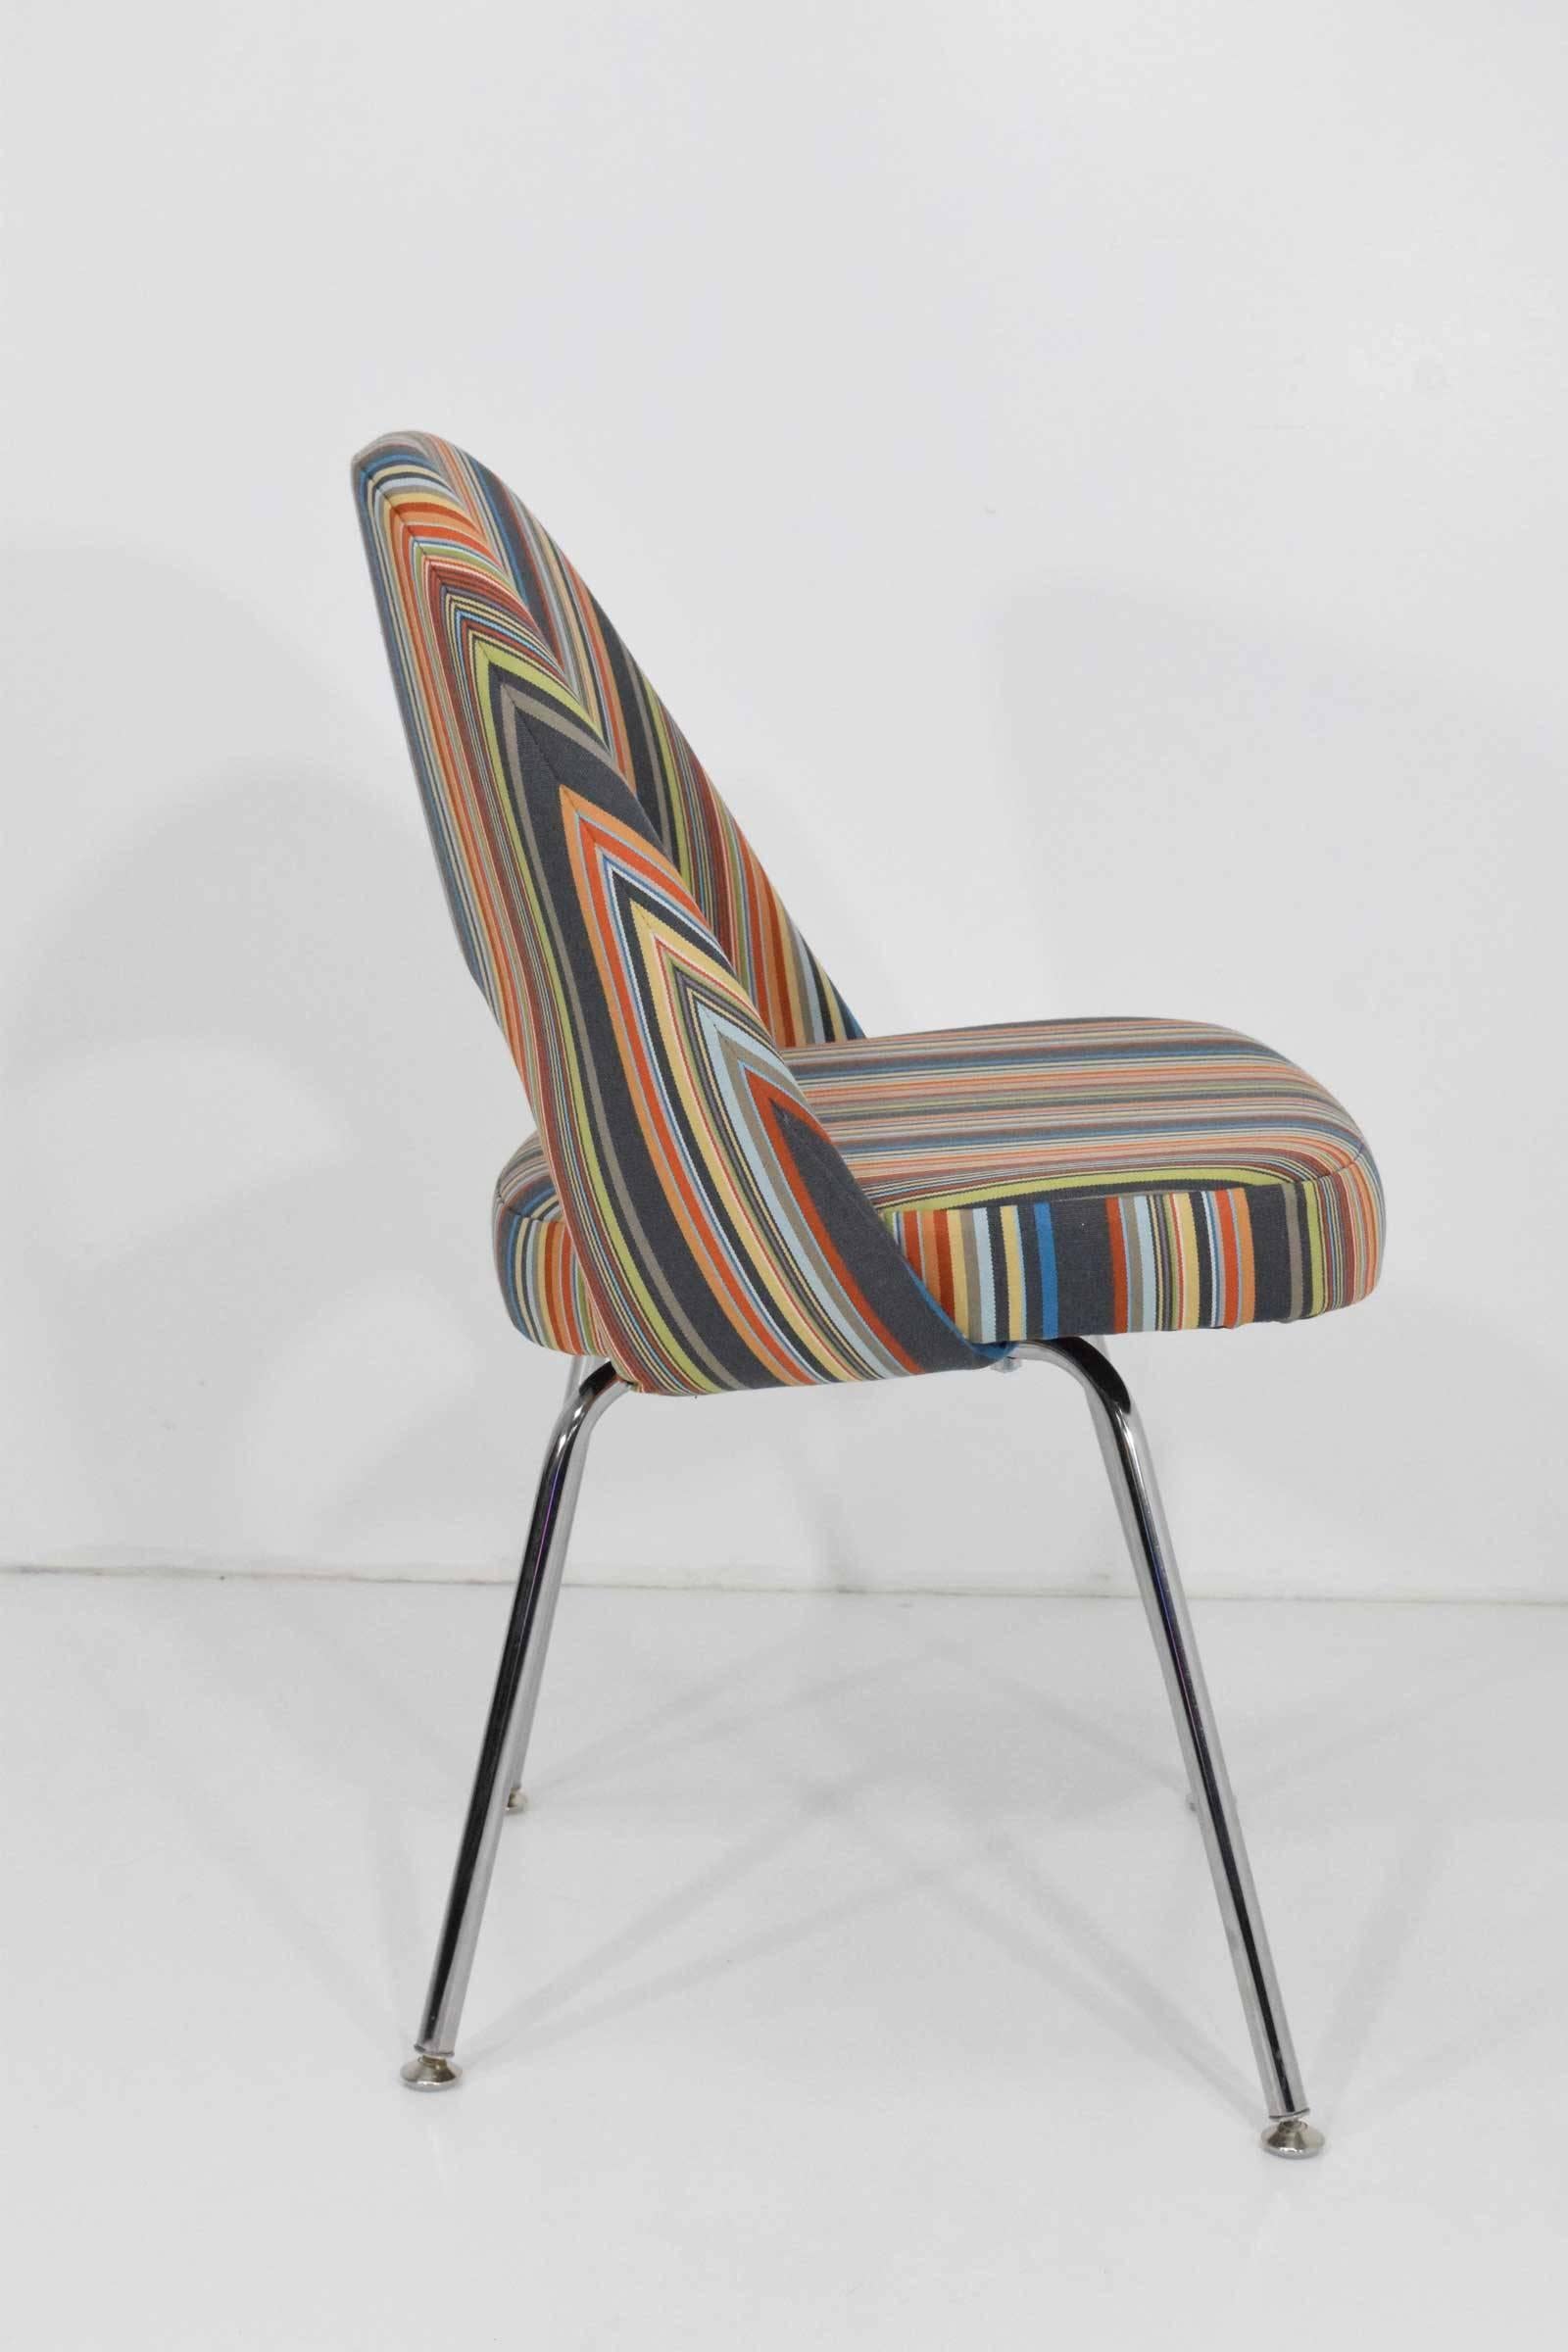 We have up to 8 chairs by Eero Saarinen for Knoll. Upholstered in Stripes by Paul Smith ($135/yard). We can sell in smaller lots if desired.